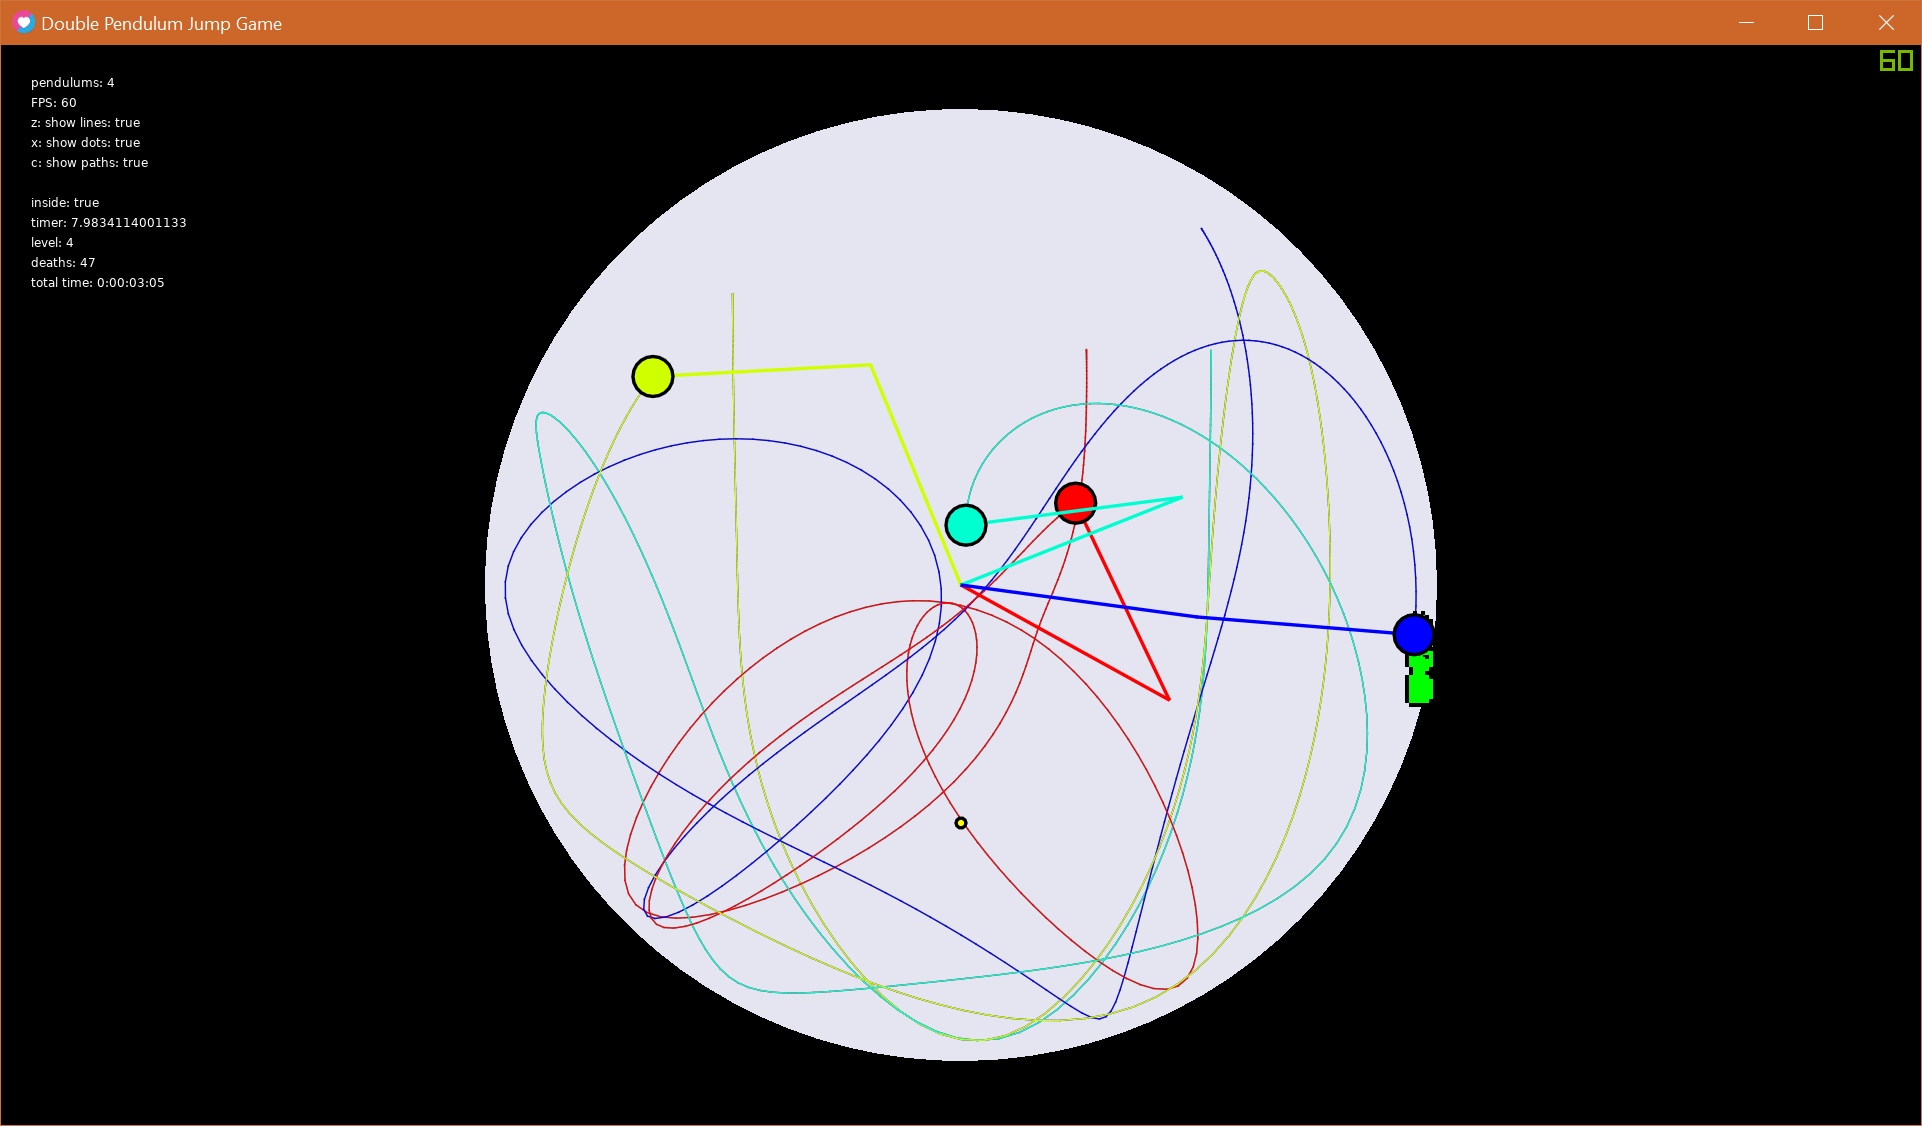 2021-05-14T00_05_01-Double Pendulum Jump Game.png